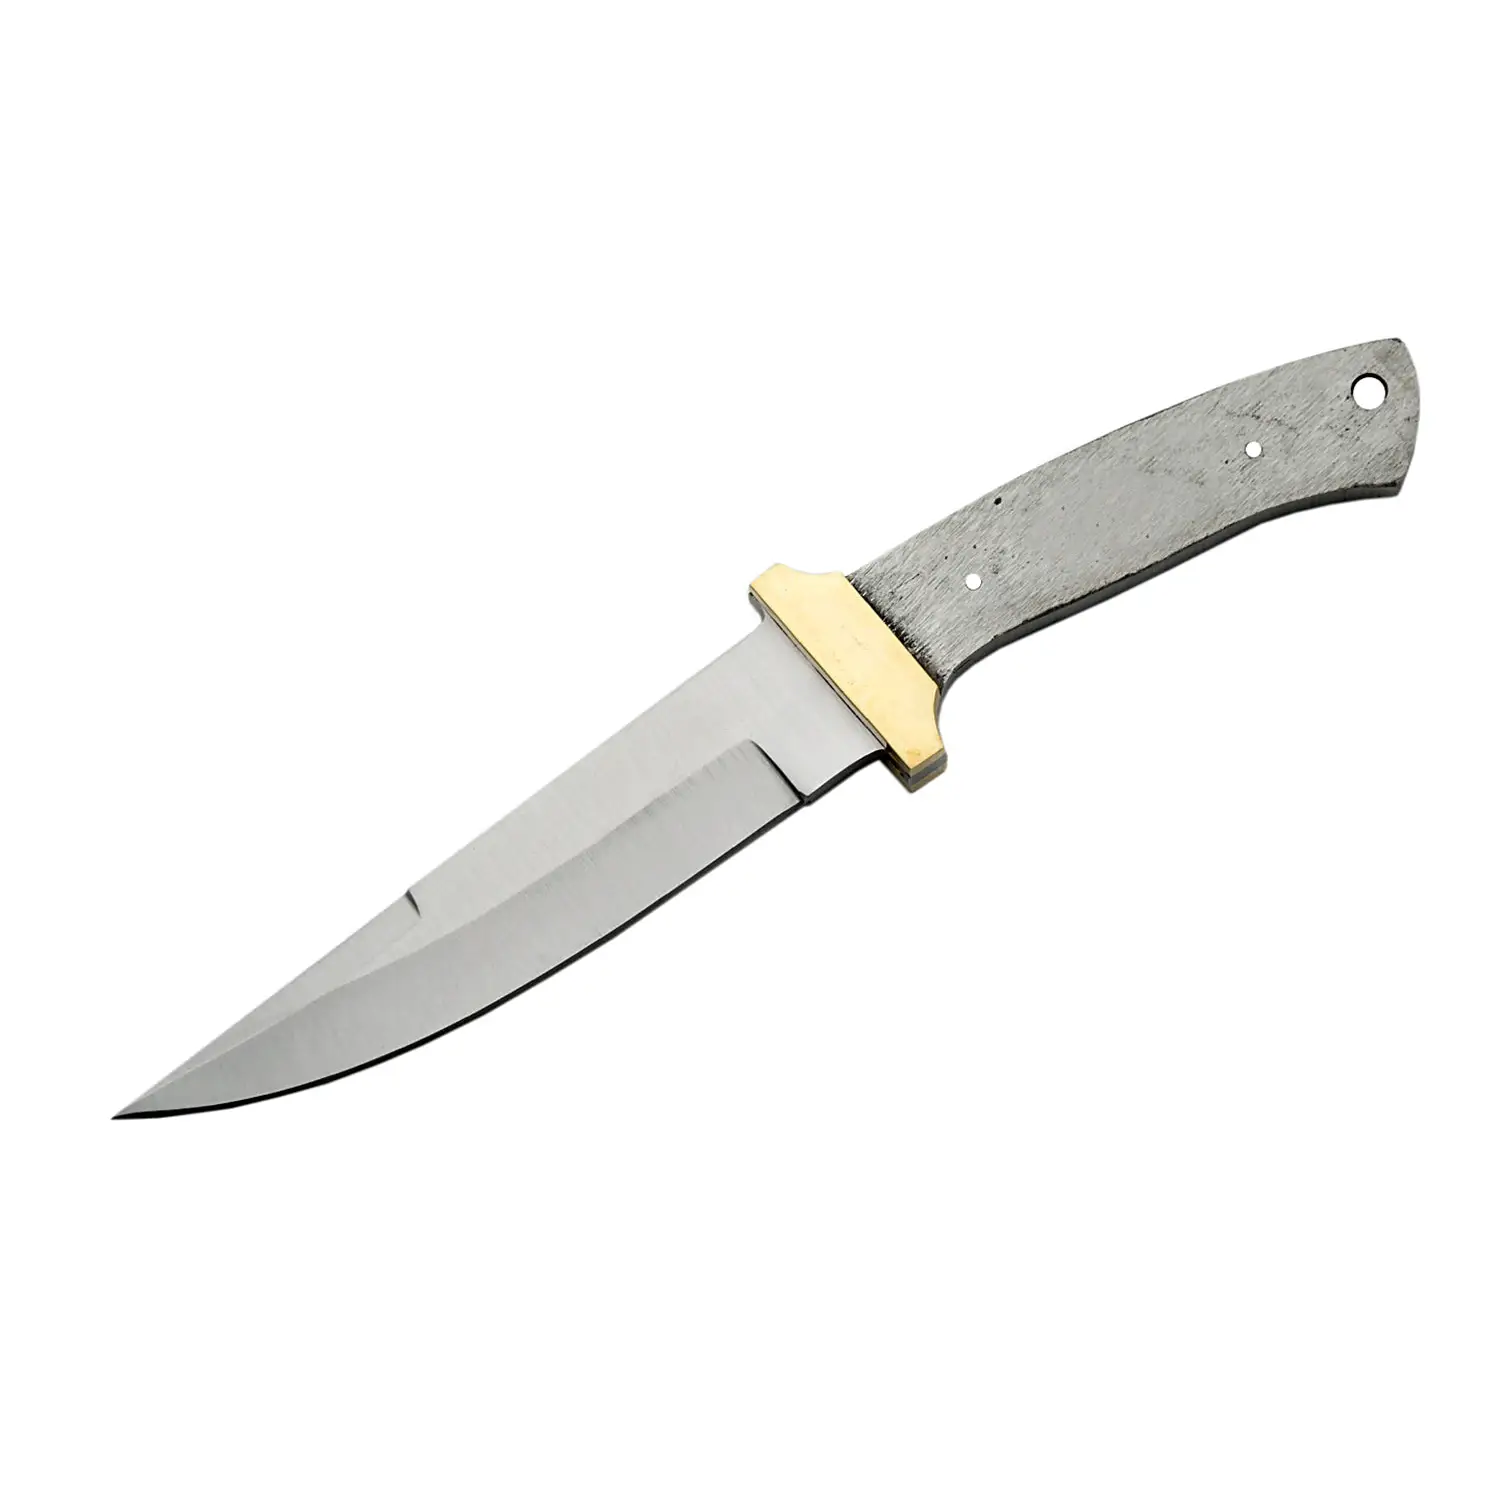 Exclusive 10 Swedged Bowie Blade with Brass Guard Hunting